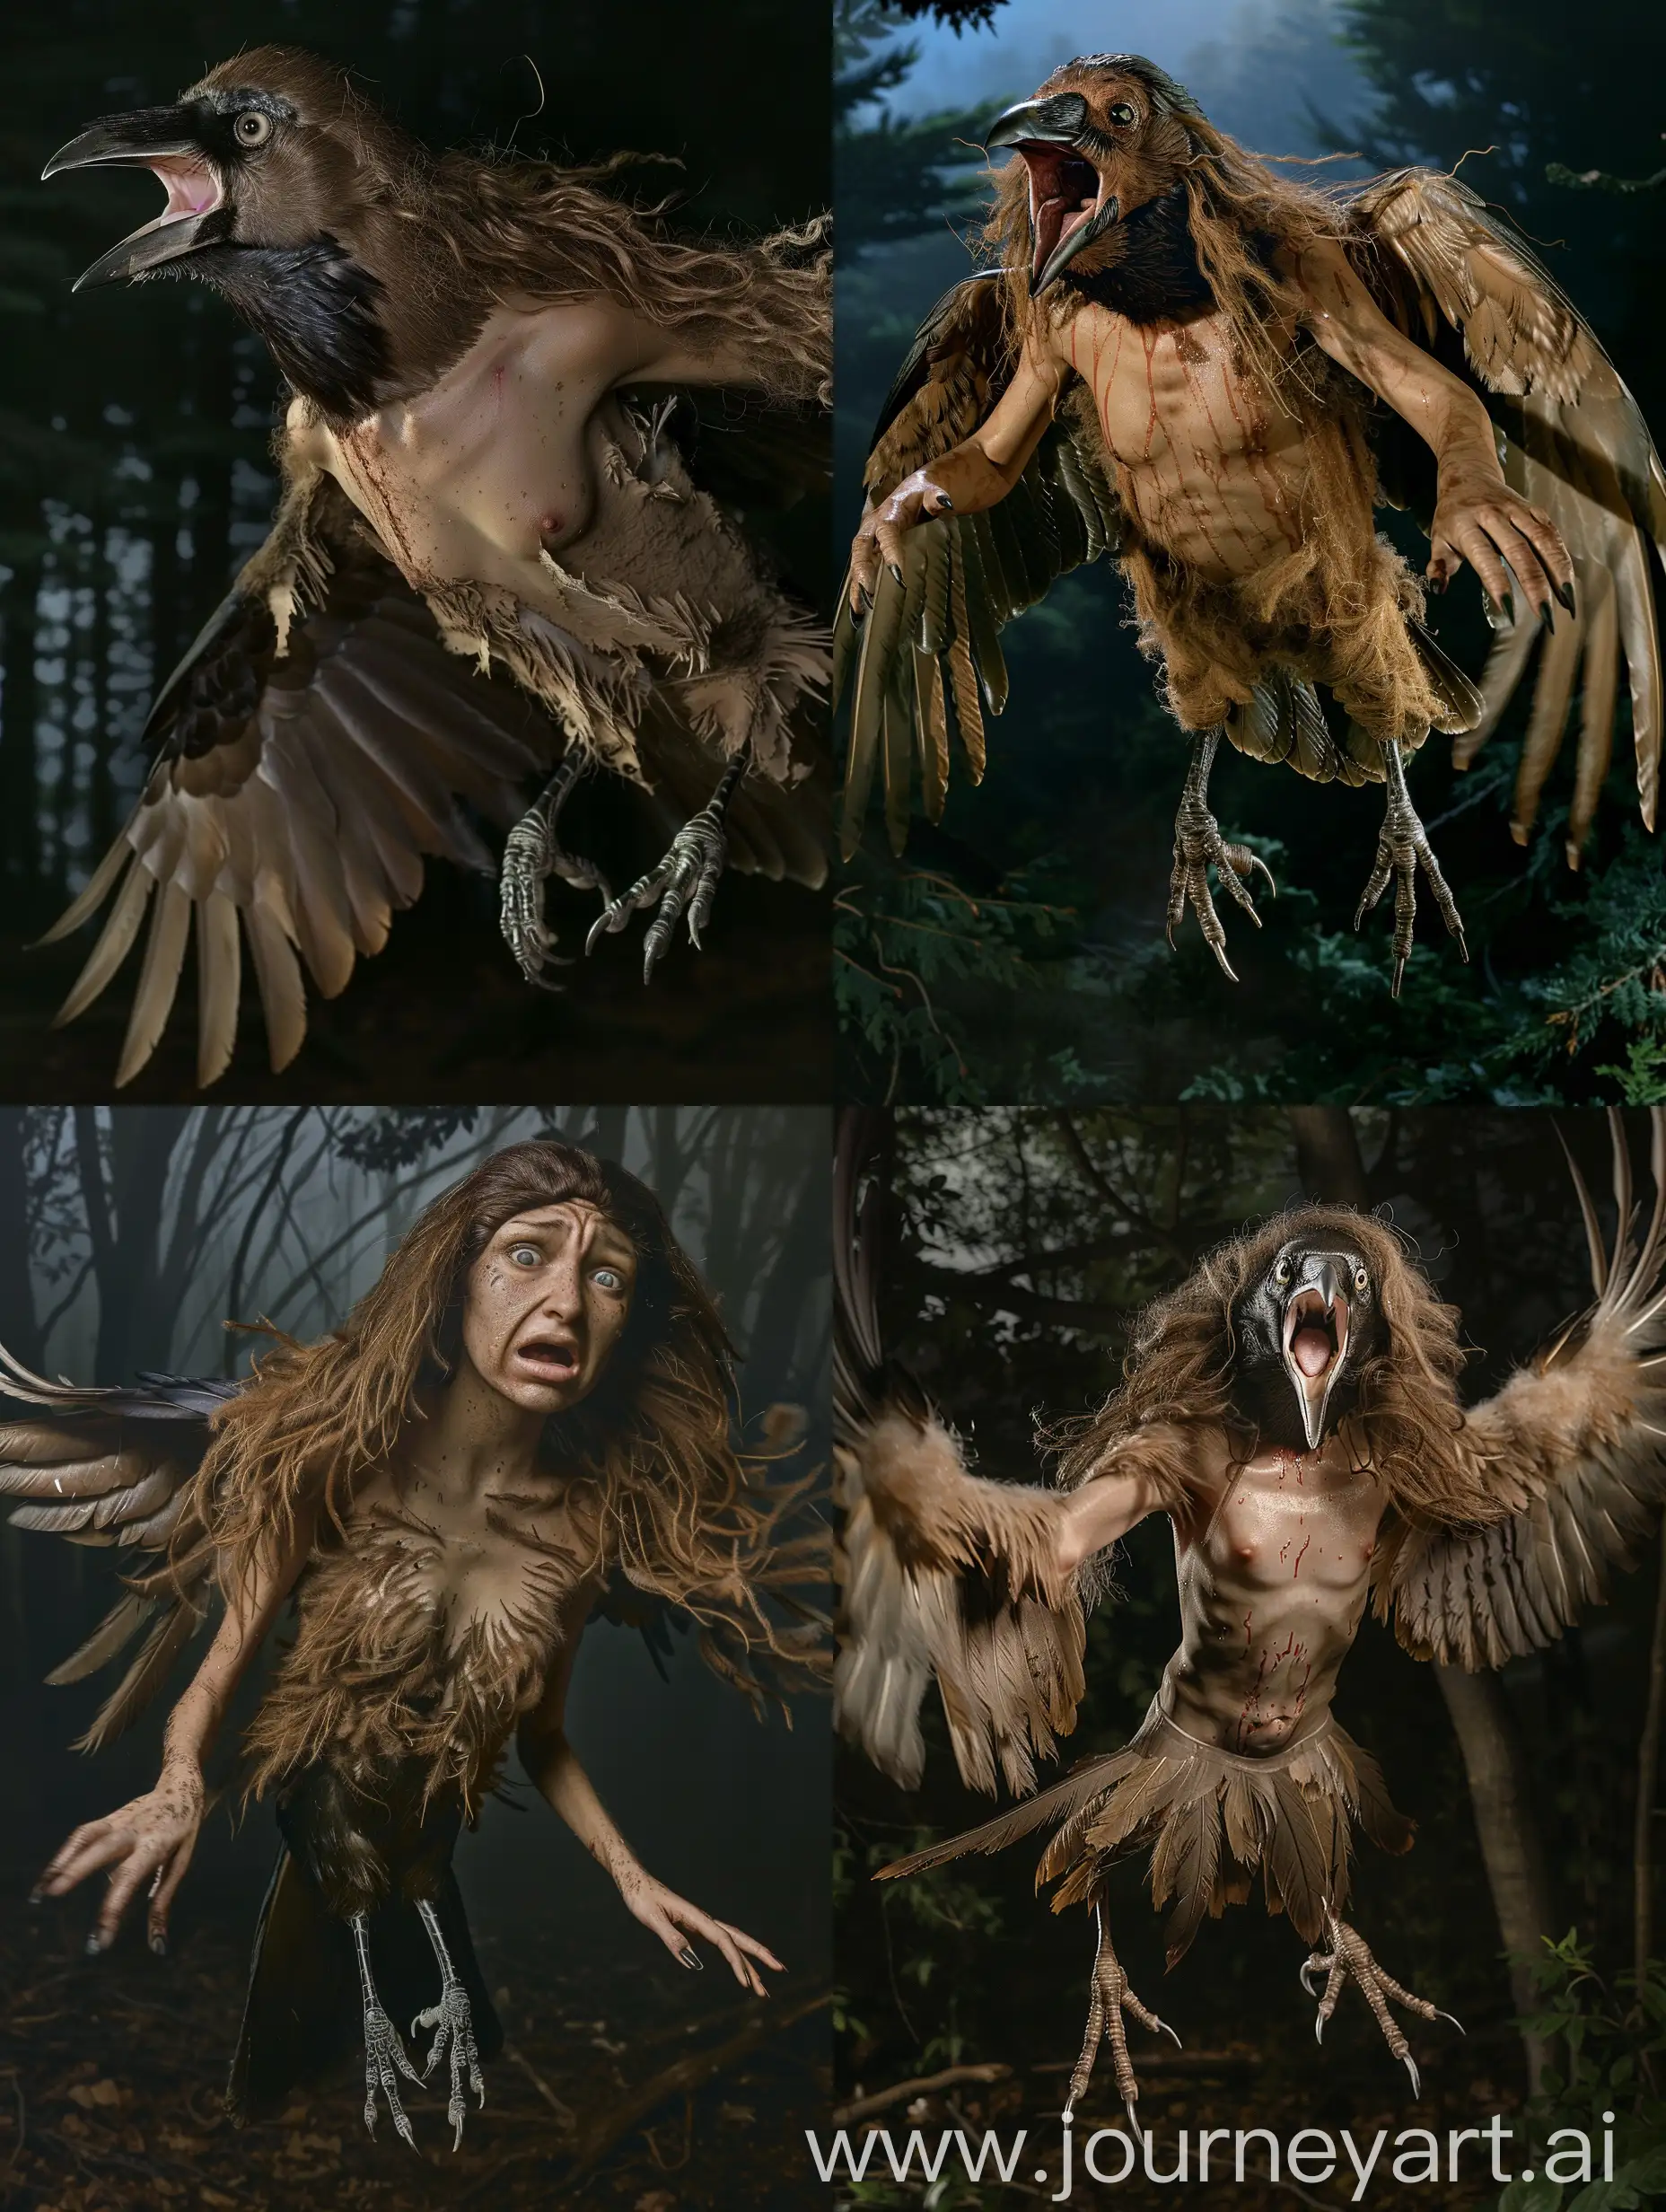 A crow. She has loose brown hair, a face and a chest. She has a feathers, a beak, claws and wings. She is flying over a forest at night. She has claws for feet. She is crying. Realistic photograph, full body picture.